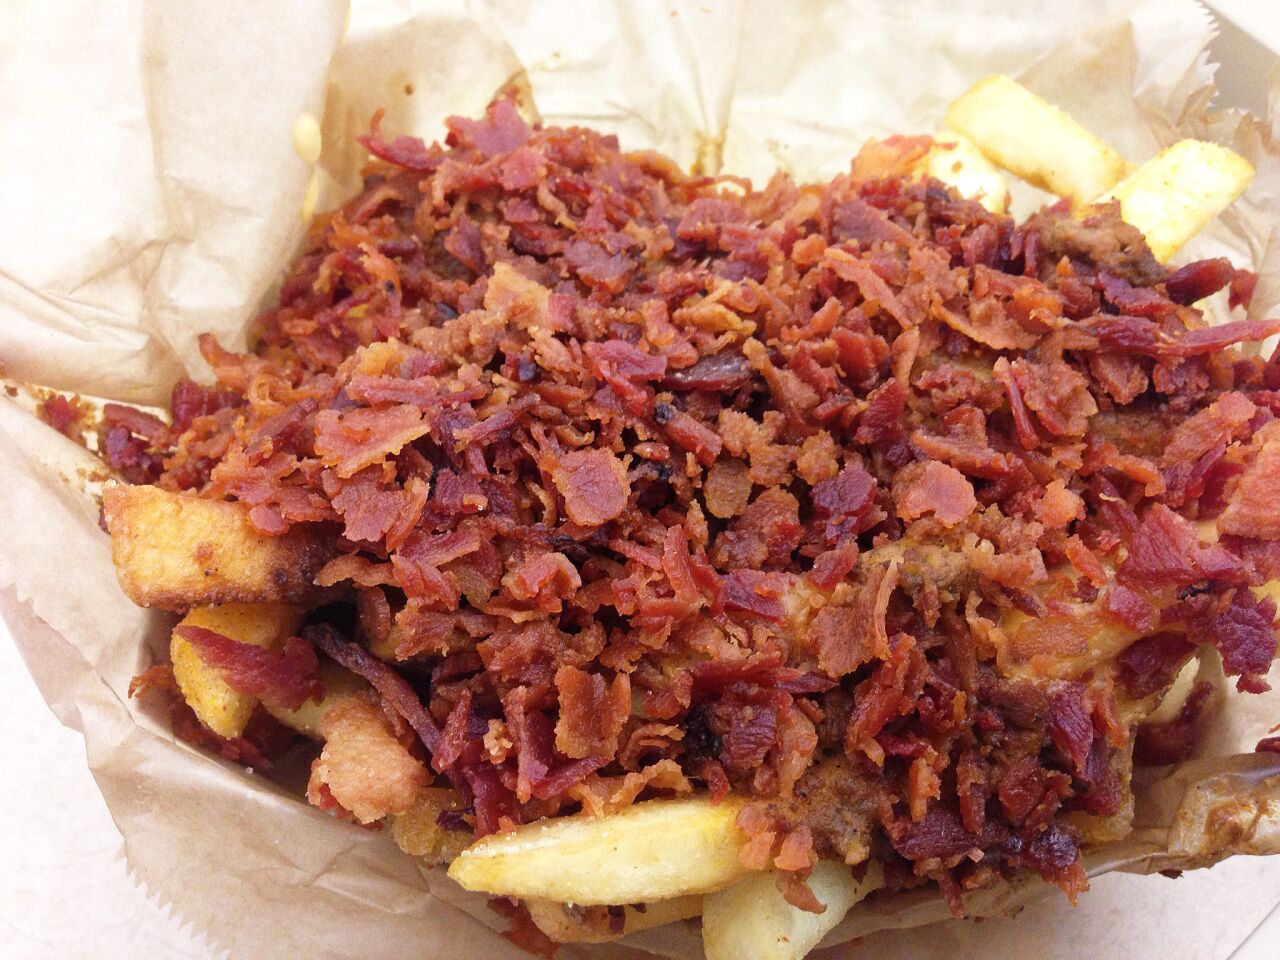 The "bomb" fries from the Greasy Wiener truck.